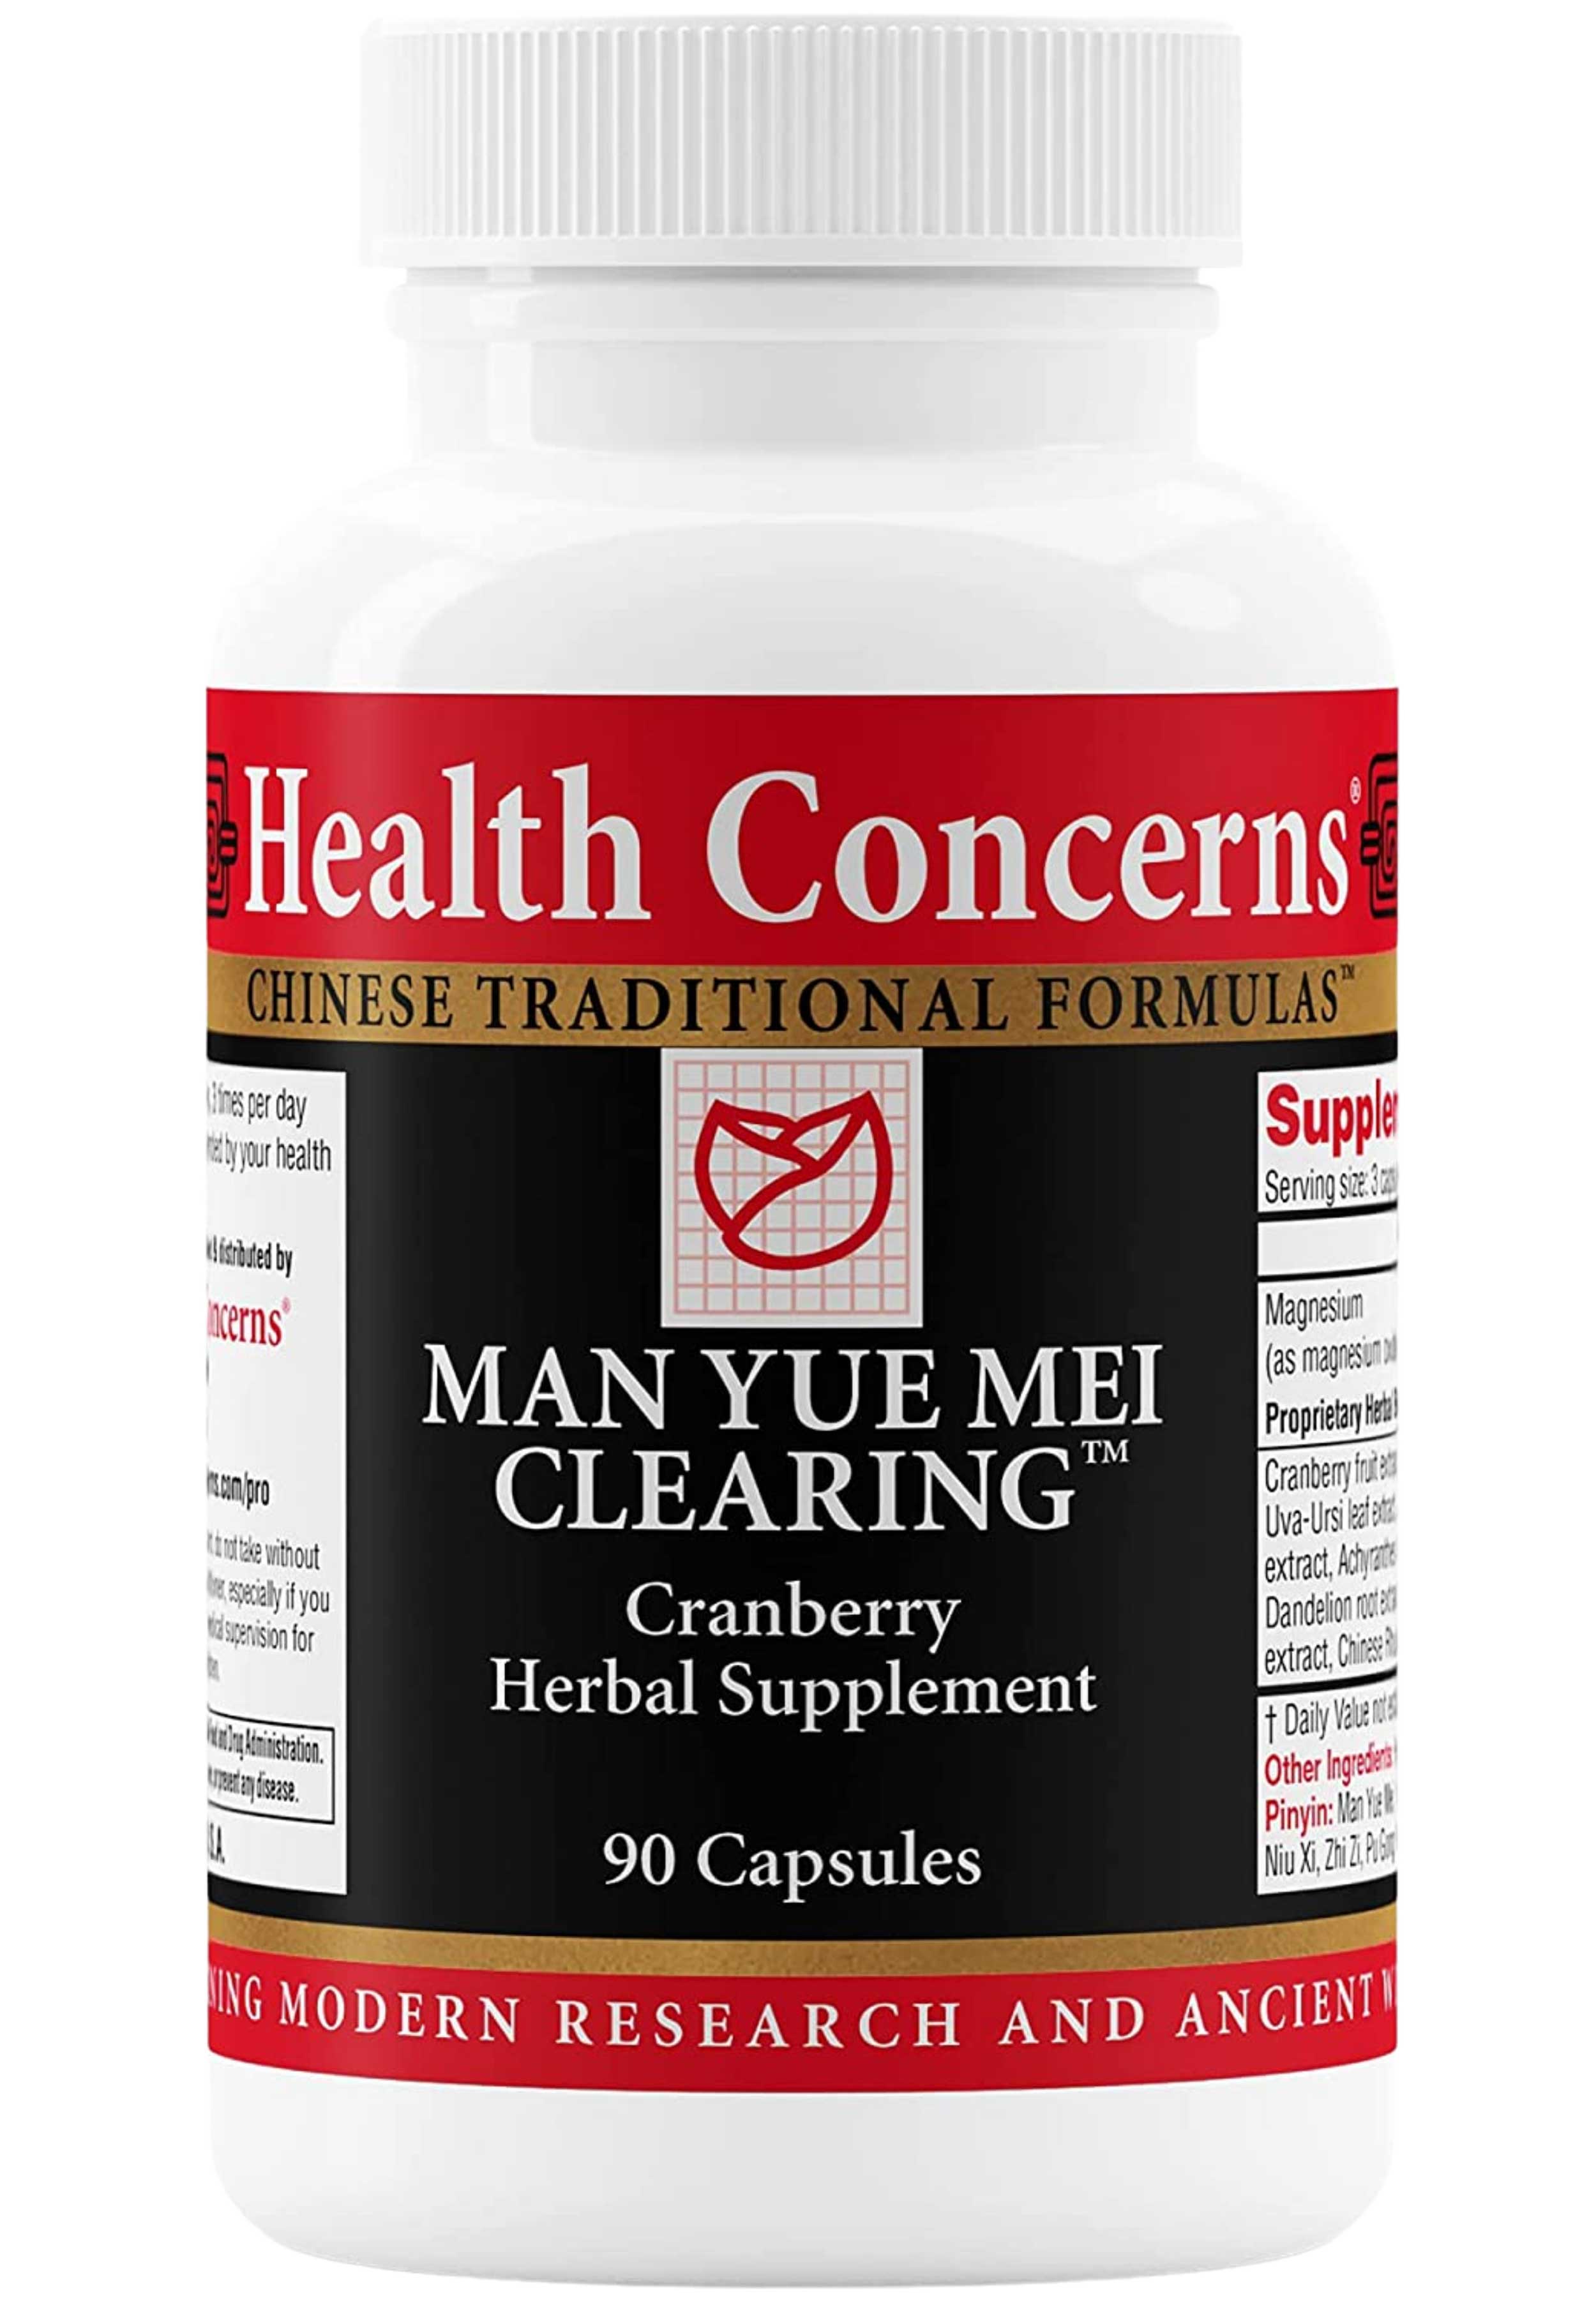 Health Concerns Man Yue Mei Clearing